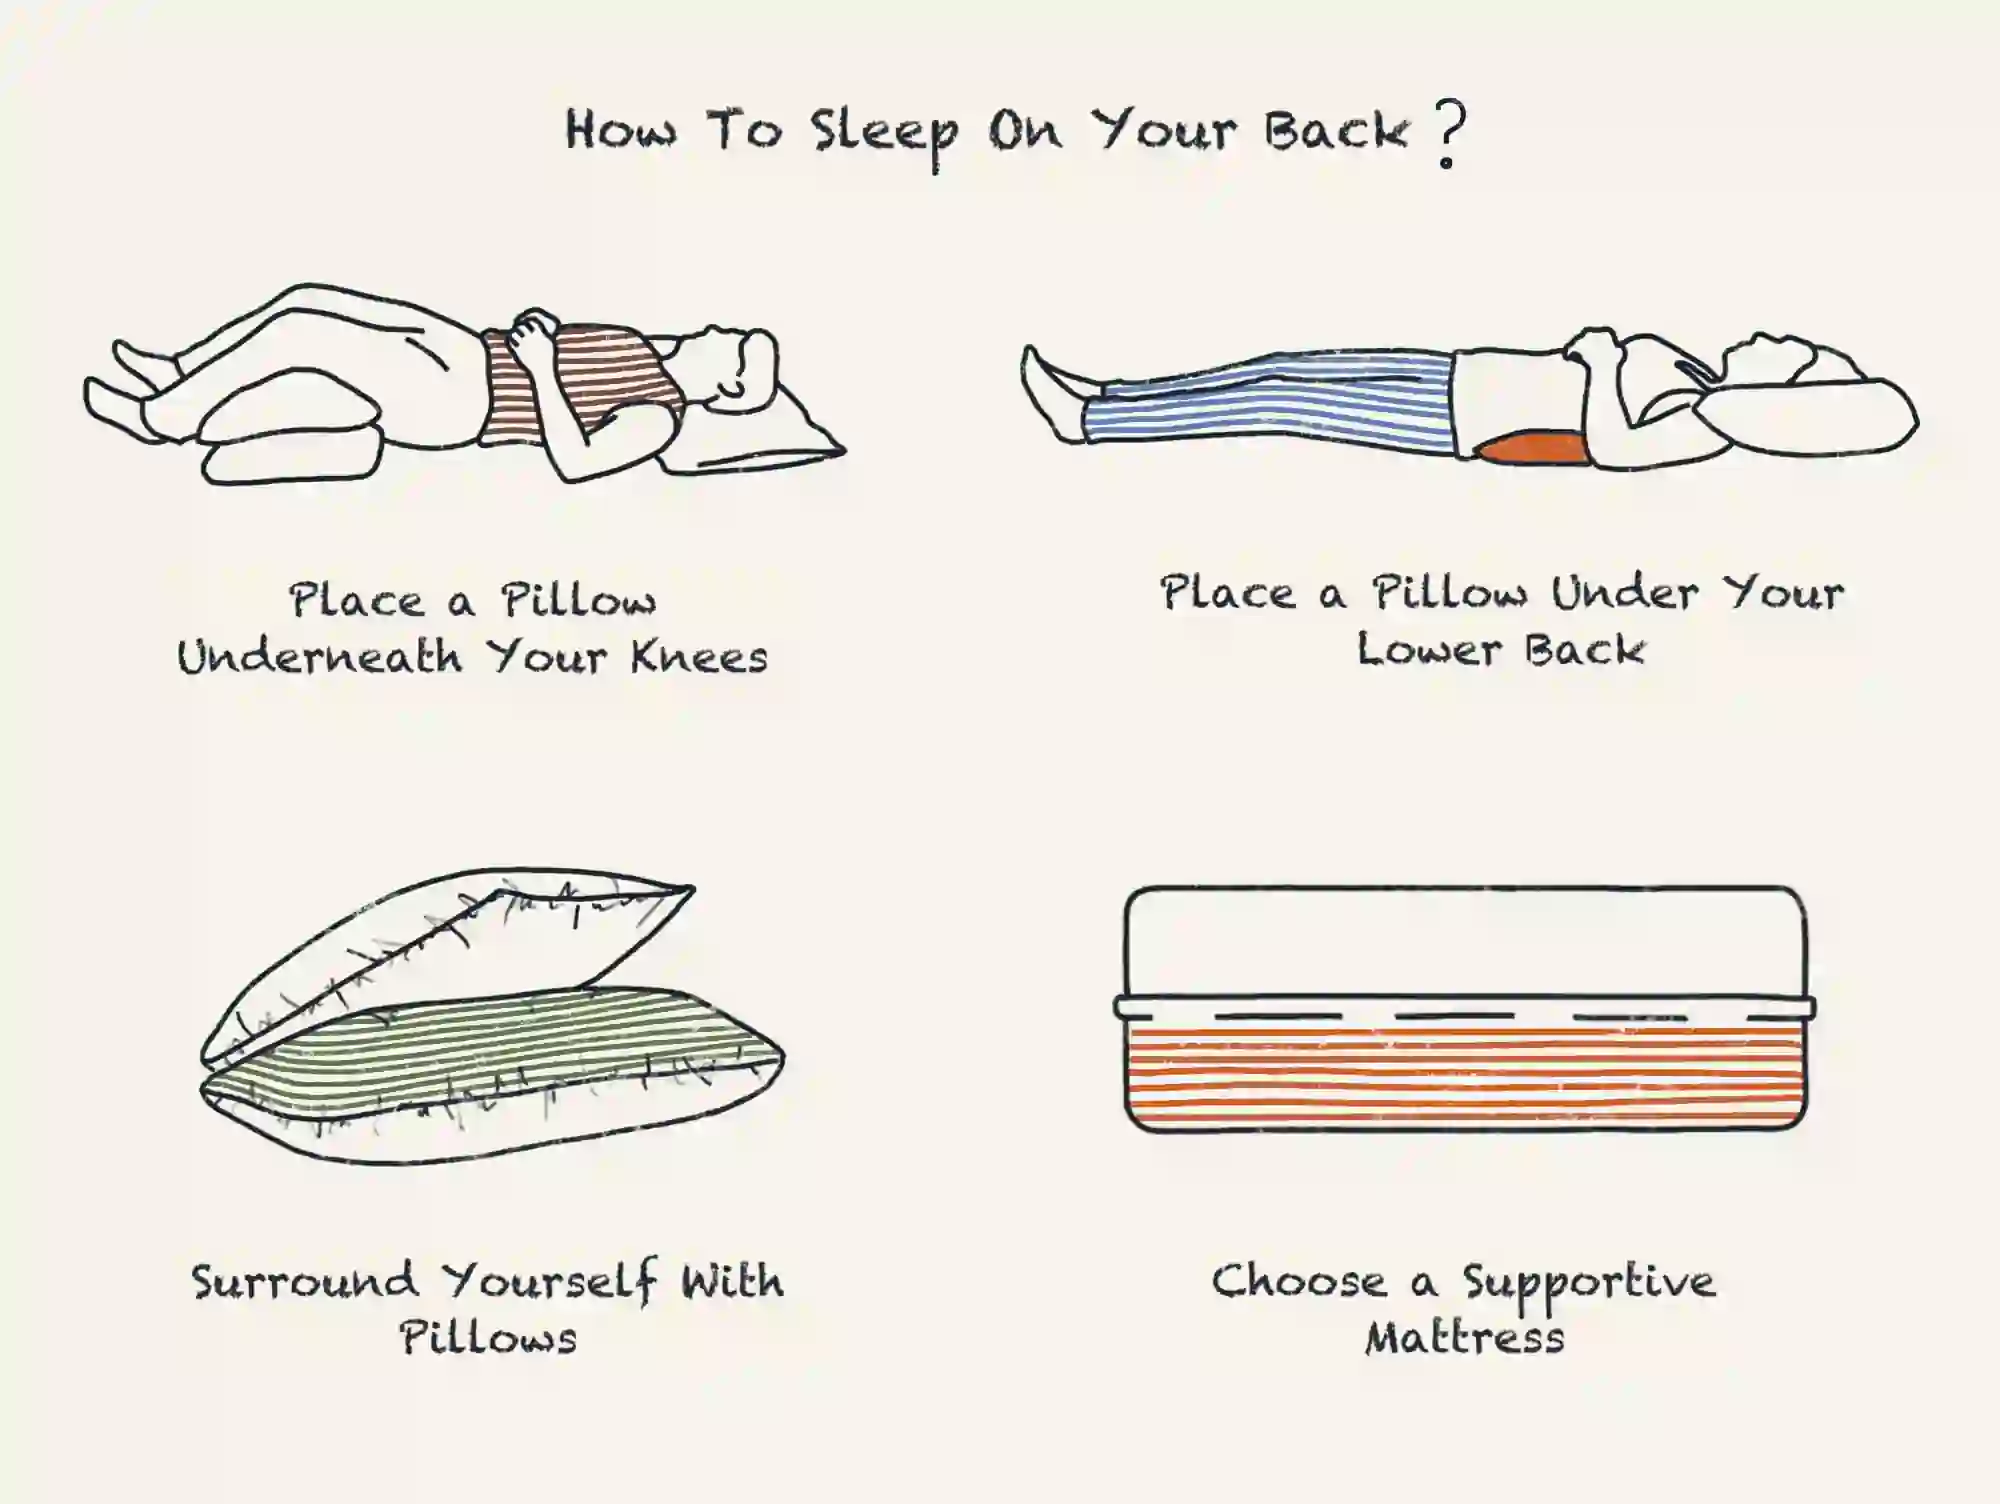 How to Train Yourself to Sleep on Your Back - UPRIGHT Posture